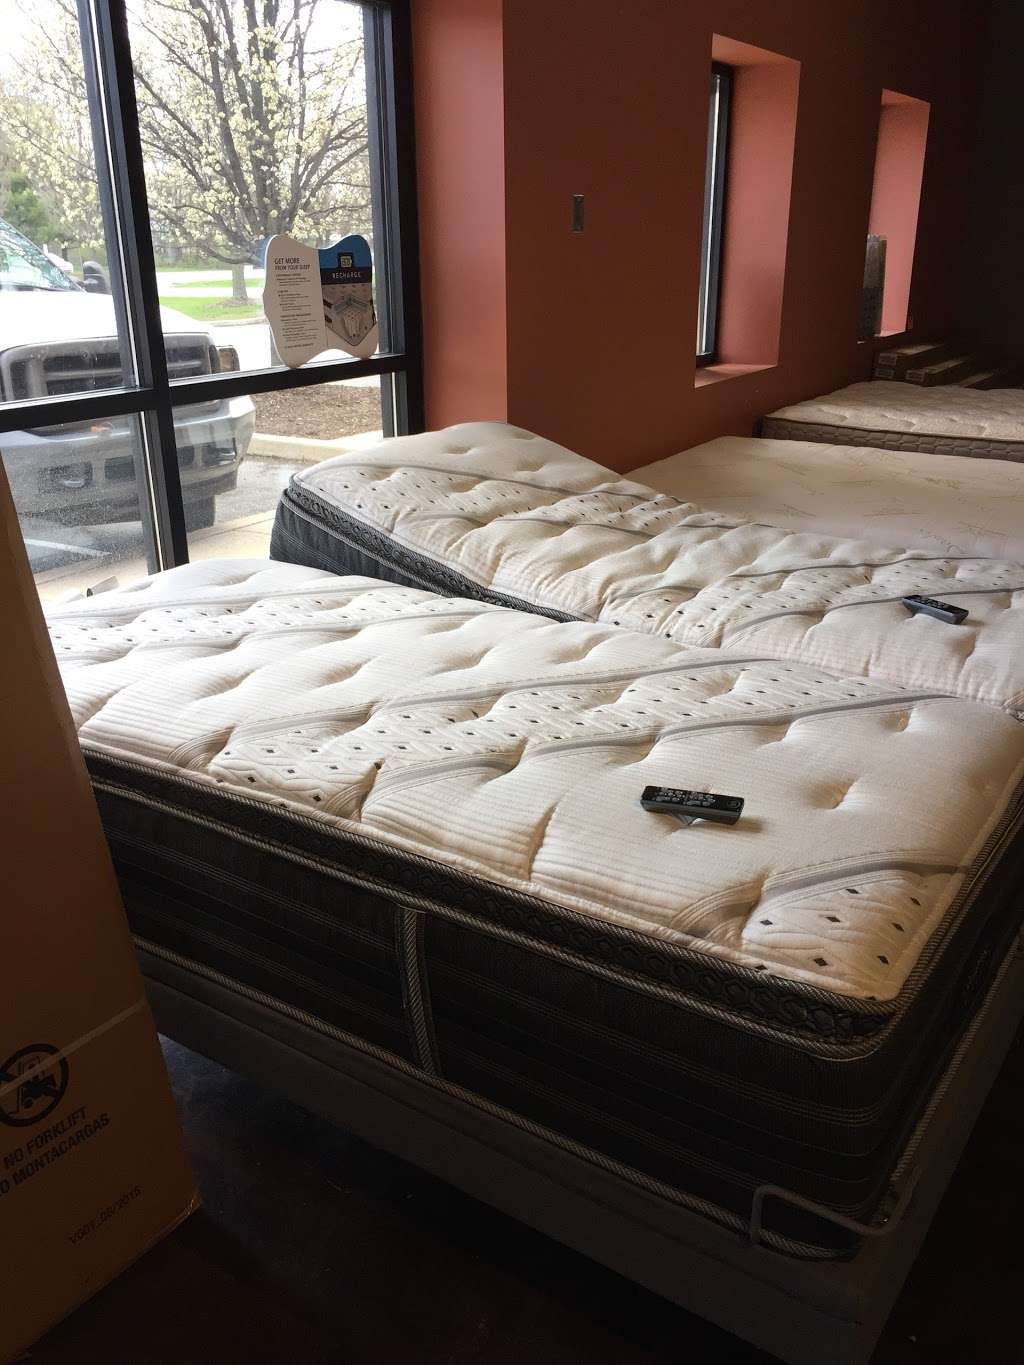 Mattress By Appointment | 10212 Governor Lane Boulevard Suite 1008, Williamsport, MD 21795 | Phone: (240) 707-1508